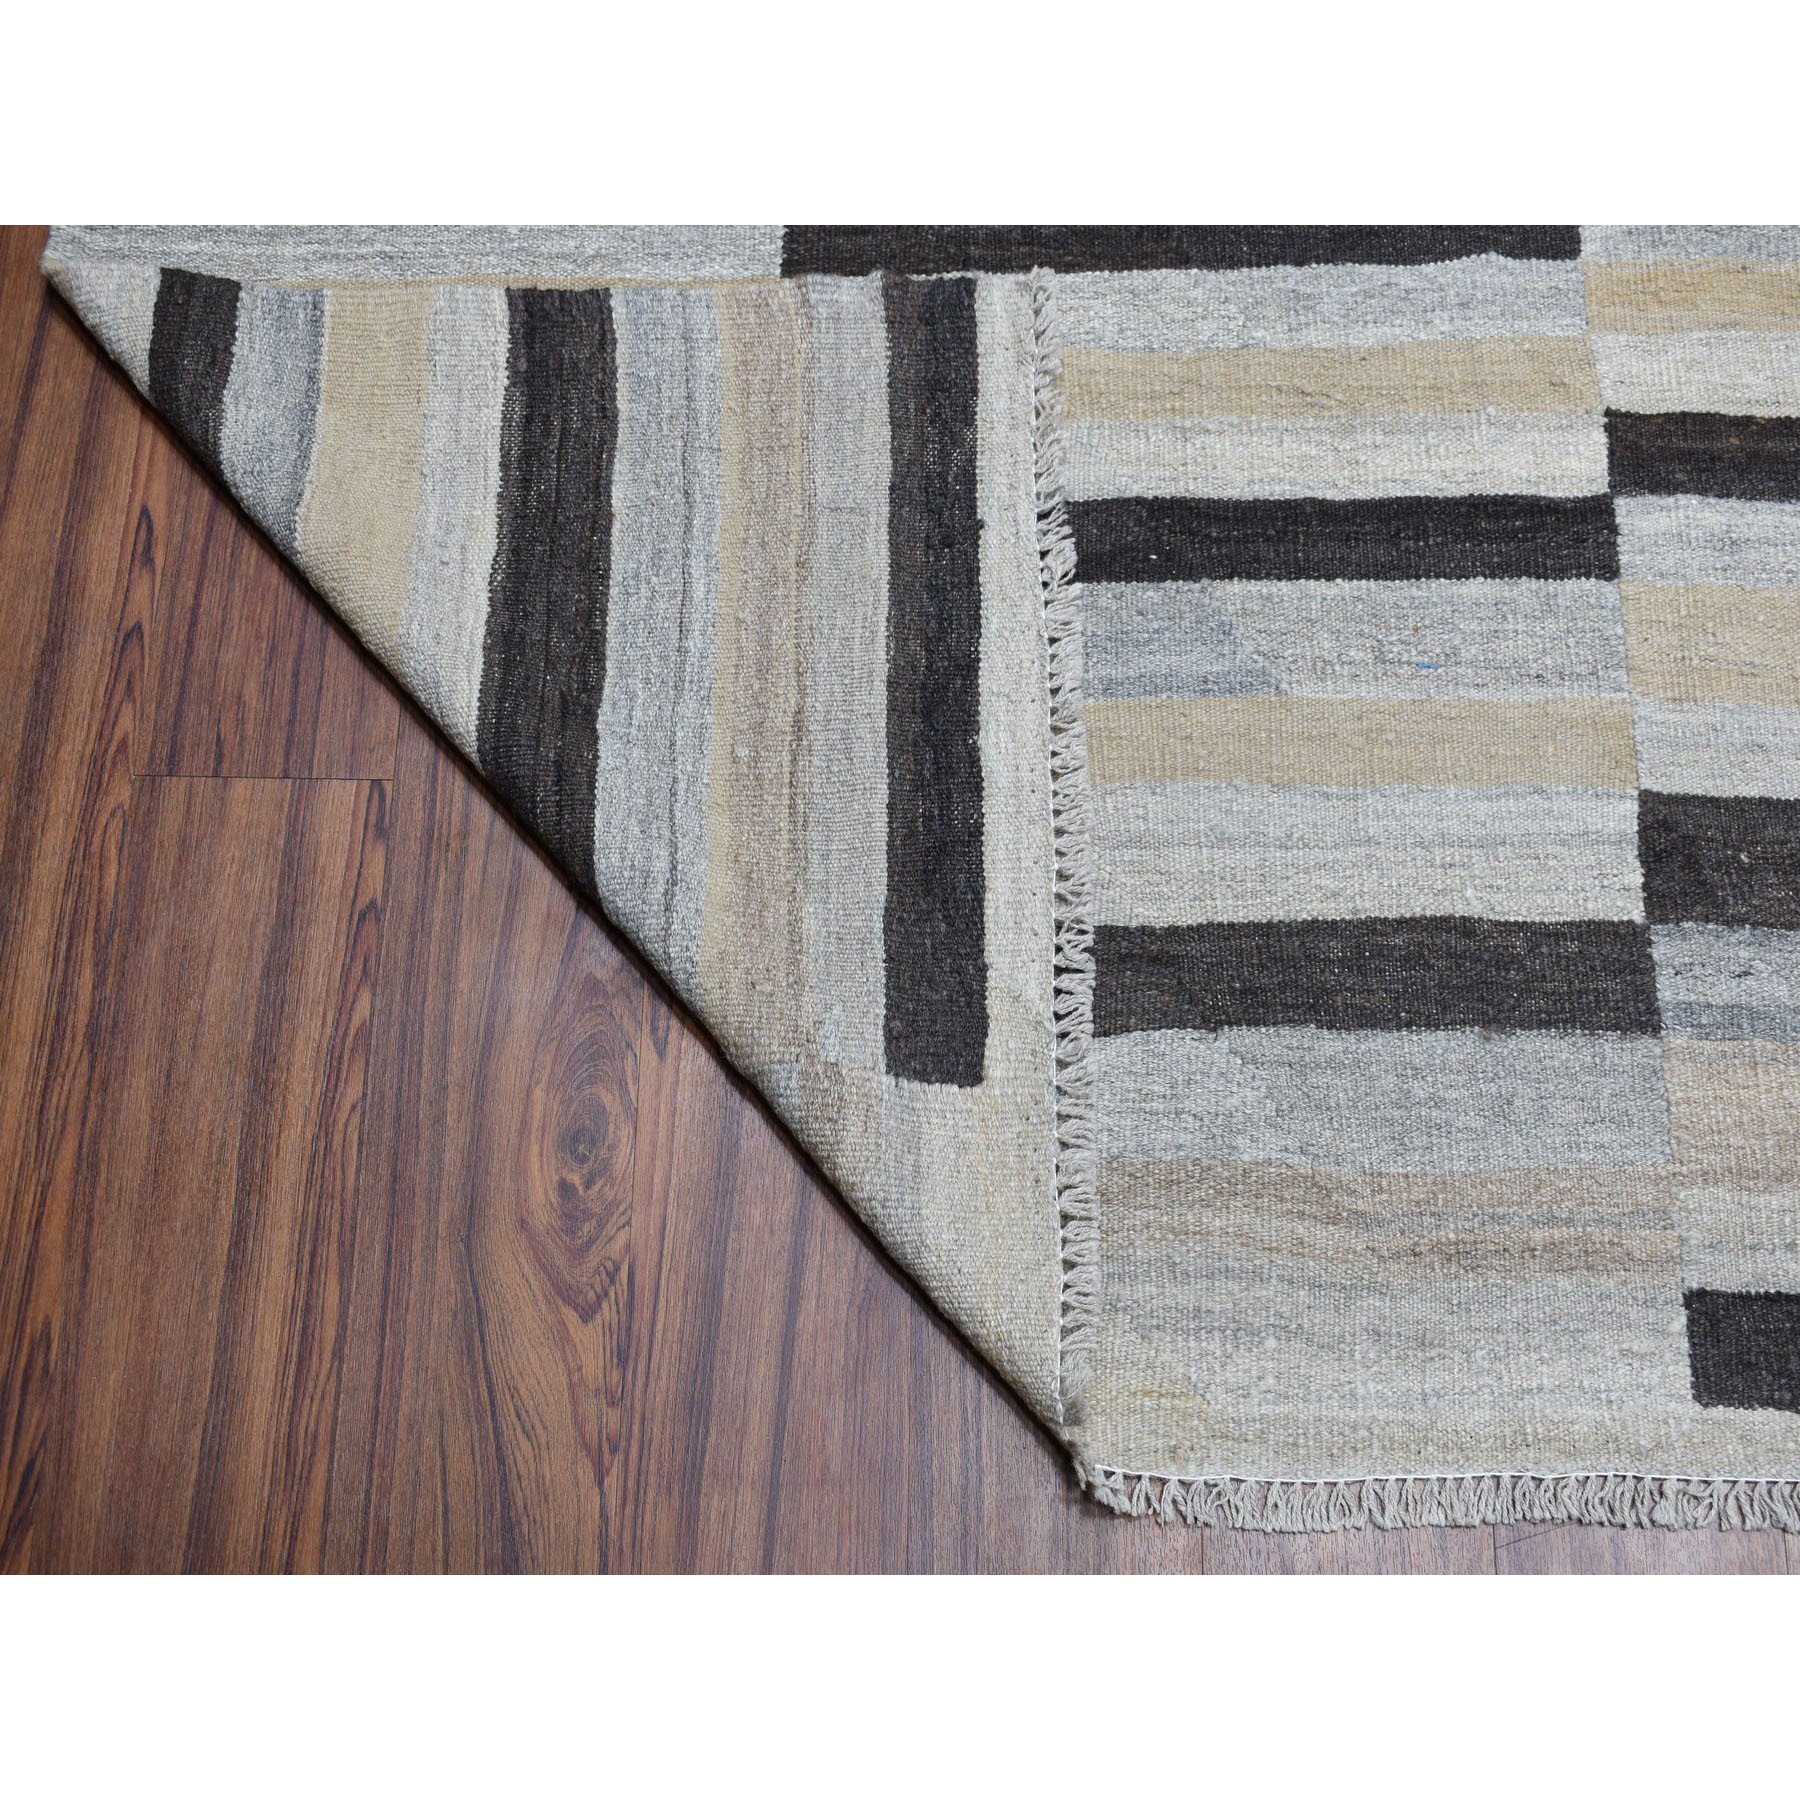 13-x9-2  Undyed Natural Wool Afghan Kilim Reversible Hand Woven Oriental Rug 